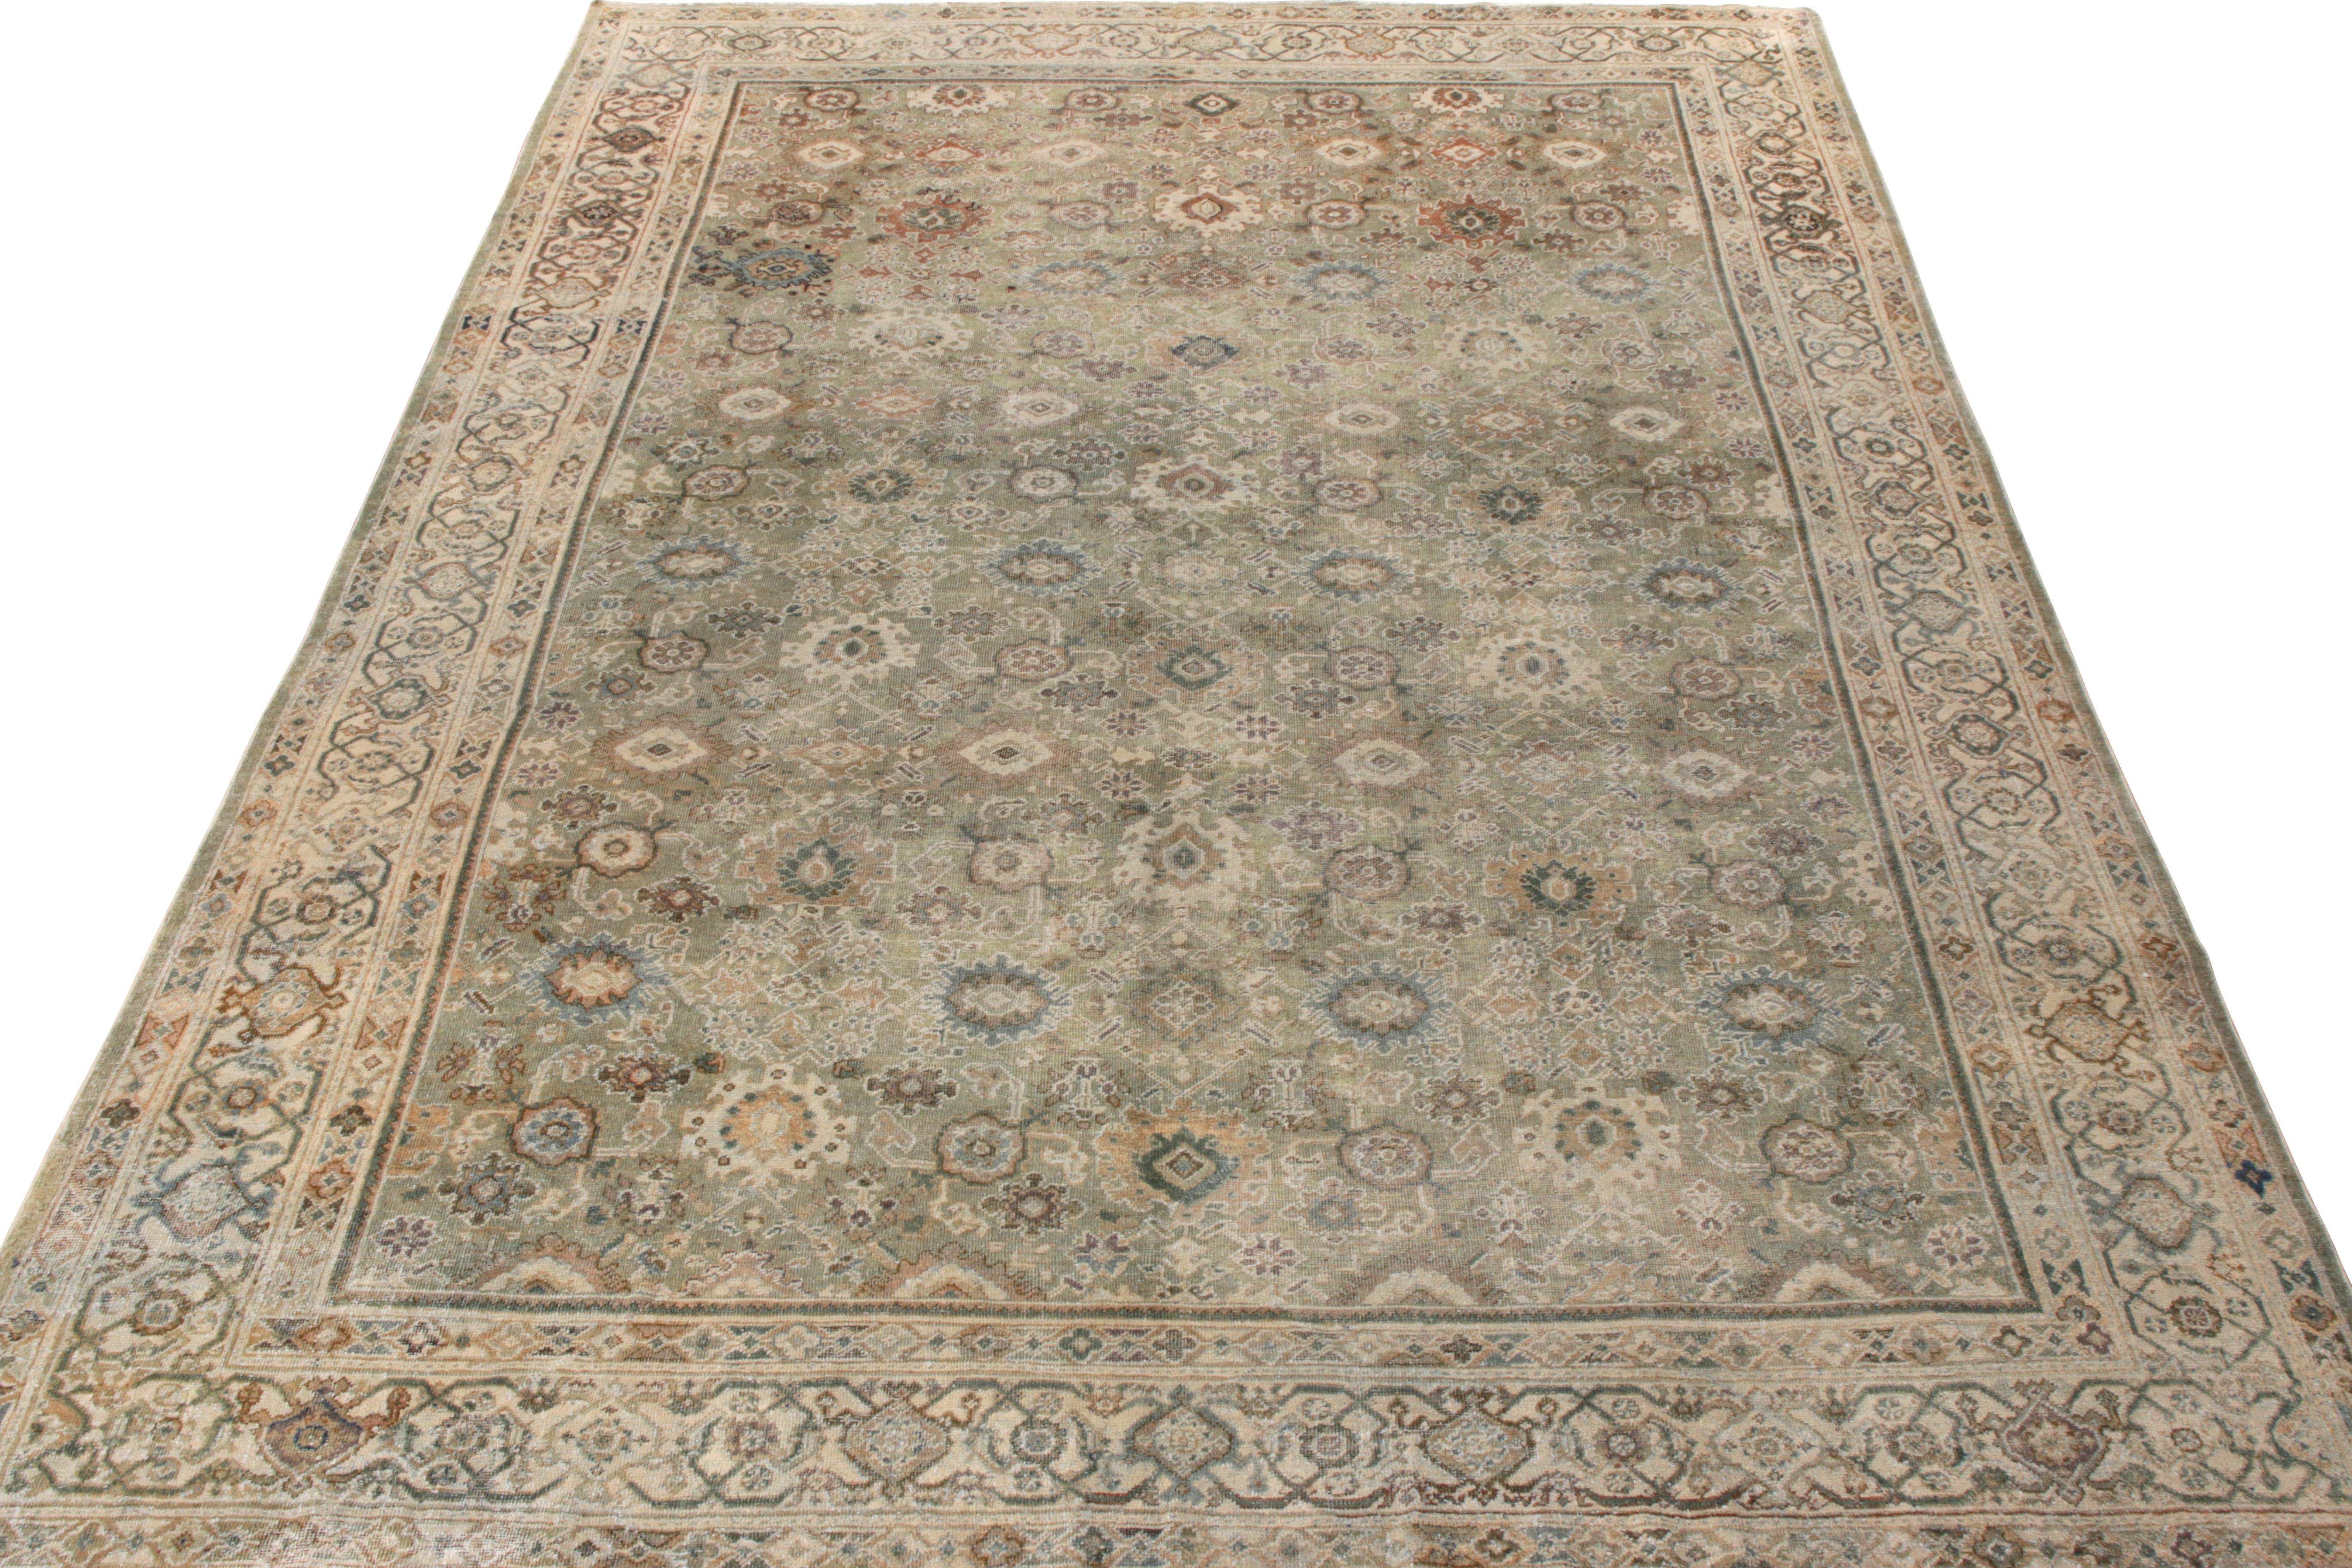 An 8x11 handknotted vintage ode to Sultanabad styles, originating from India circa 1950-1960 making way to Rug & Kilim’s Antique & Vintage Collection. This gorgeous piece features a dense, closely packed floral pattern in an exemplary choice of